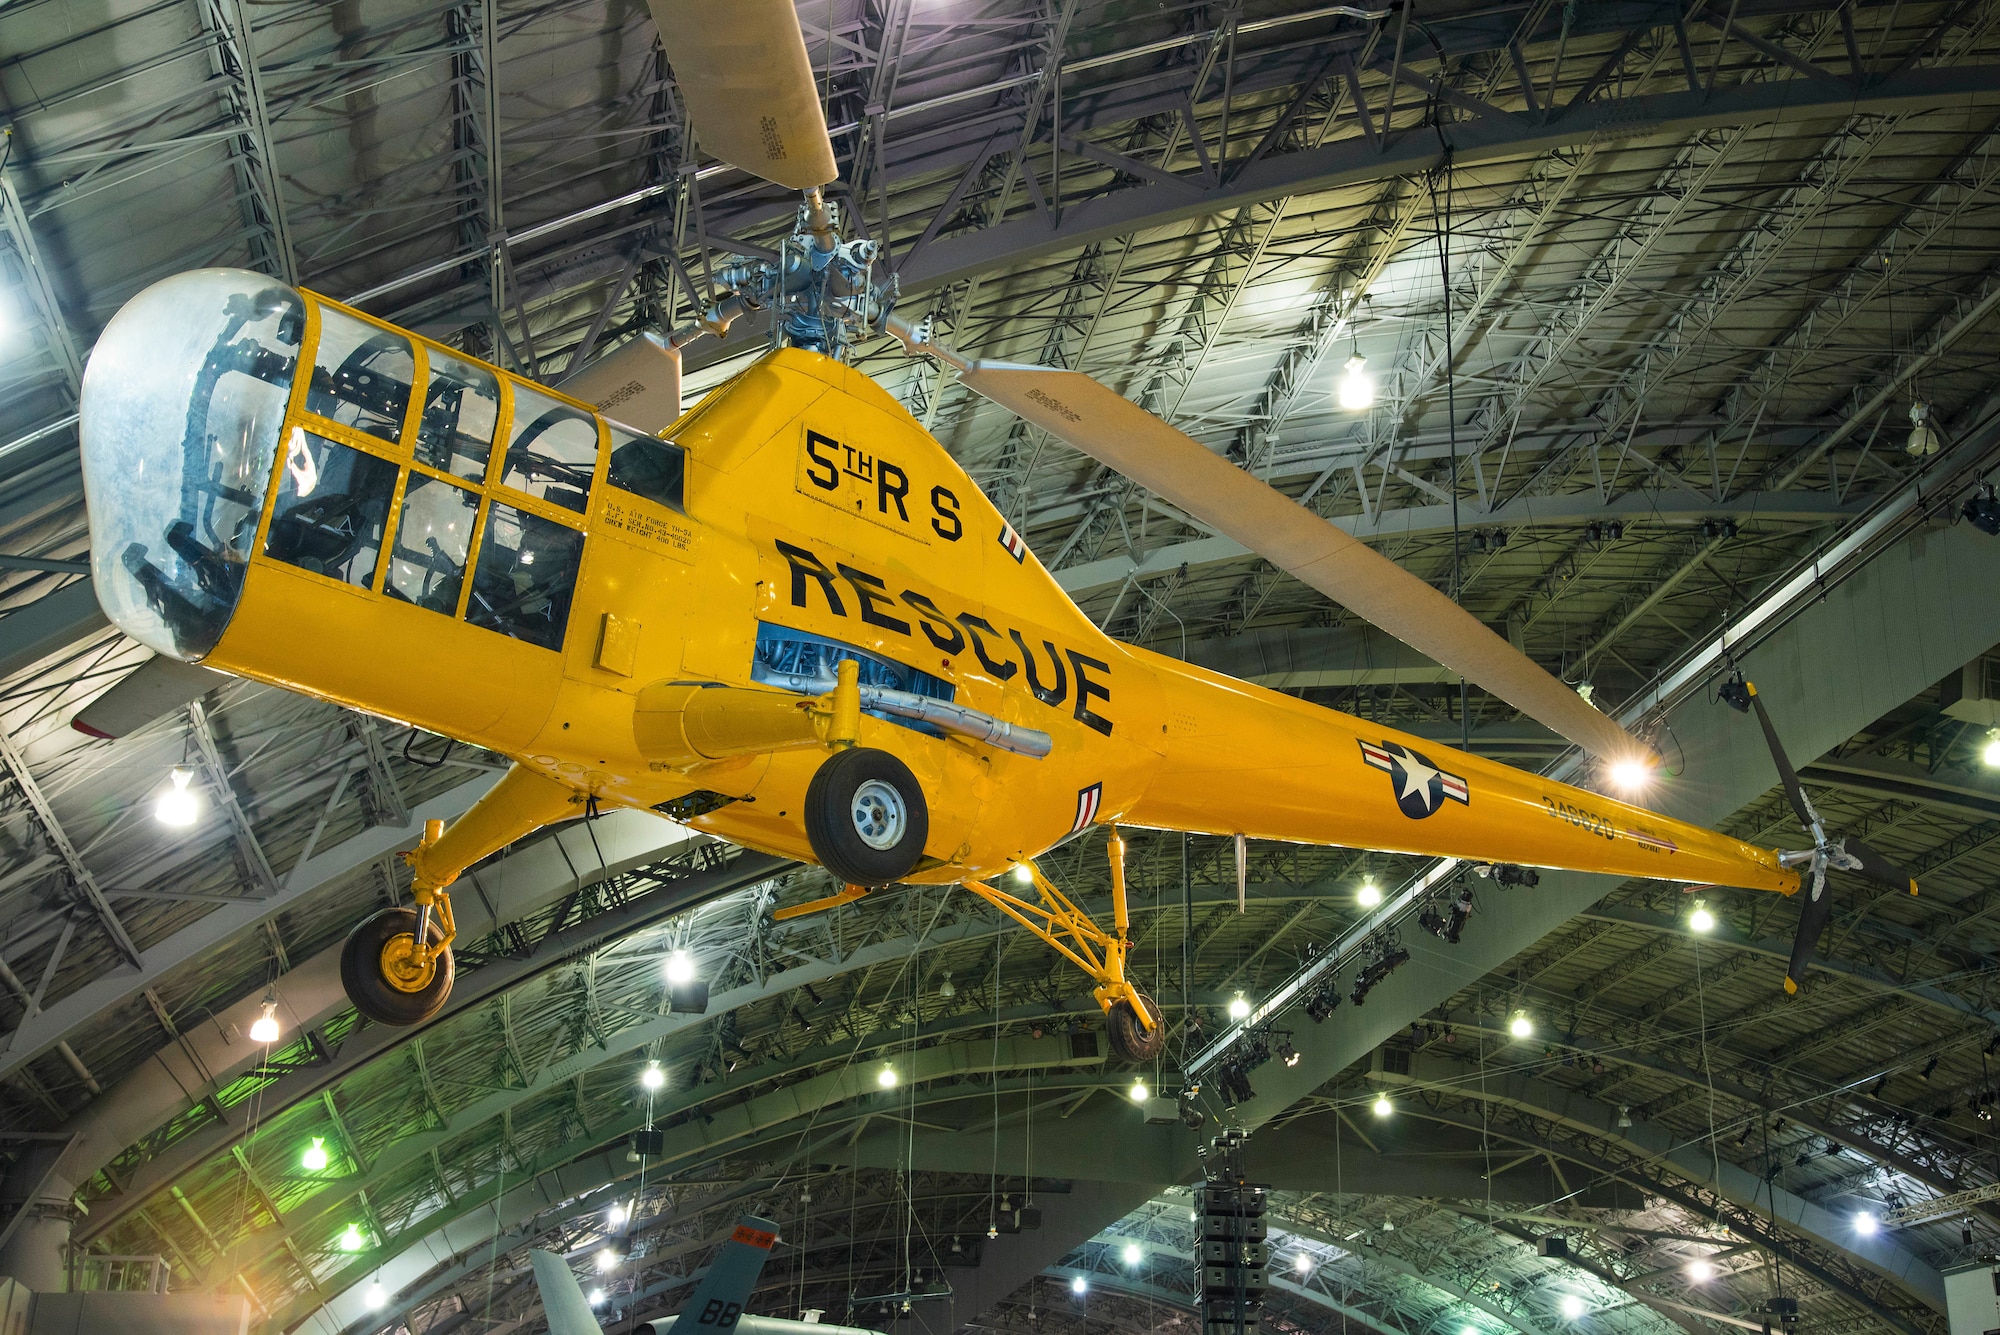 Sikorsky YH-5A in the Korean War Gallery at the National Museum of the United States Air Force. (U.S. Air Force photo by Ken LaRock)